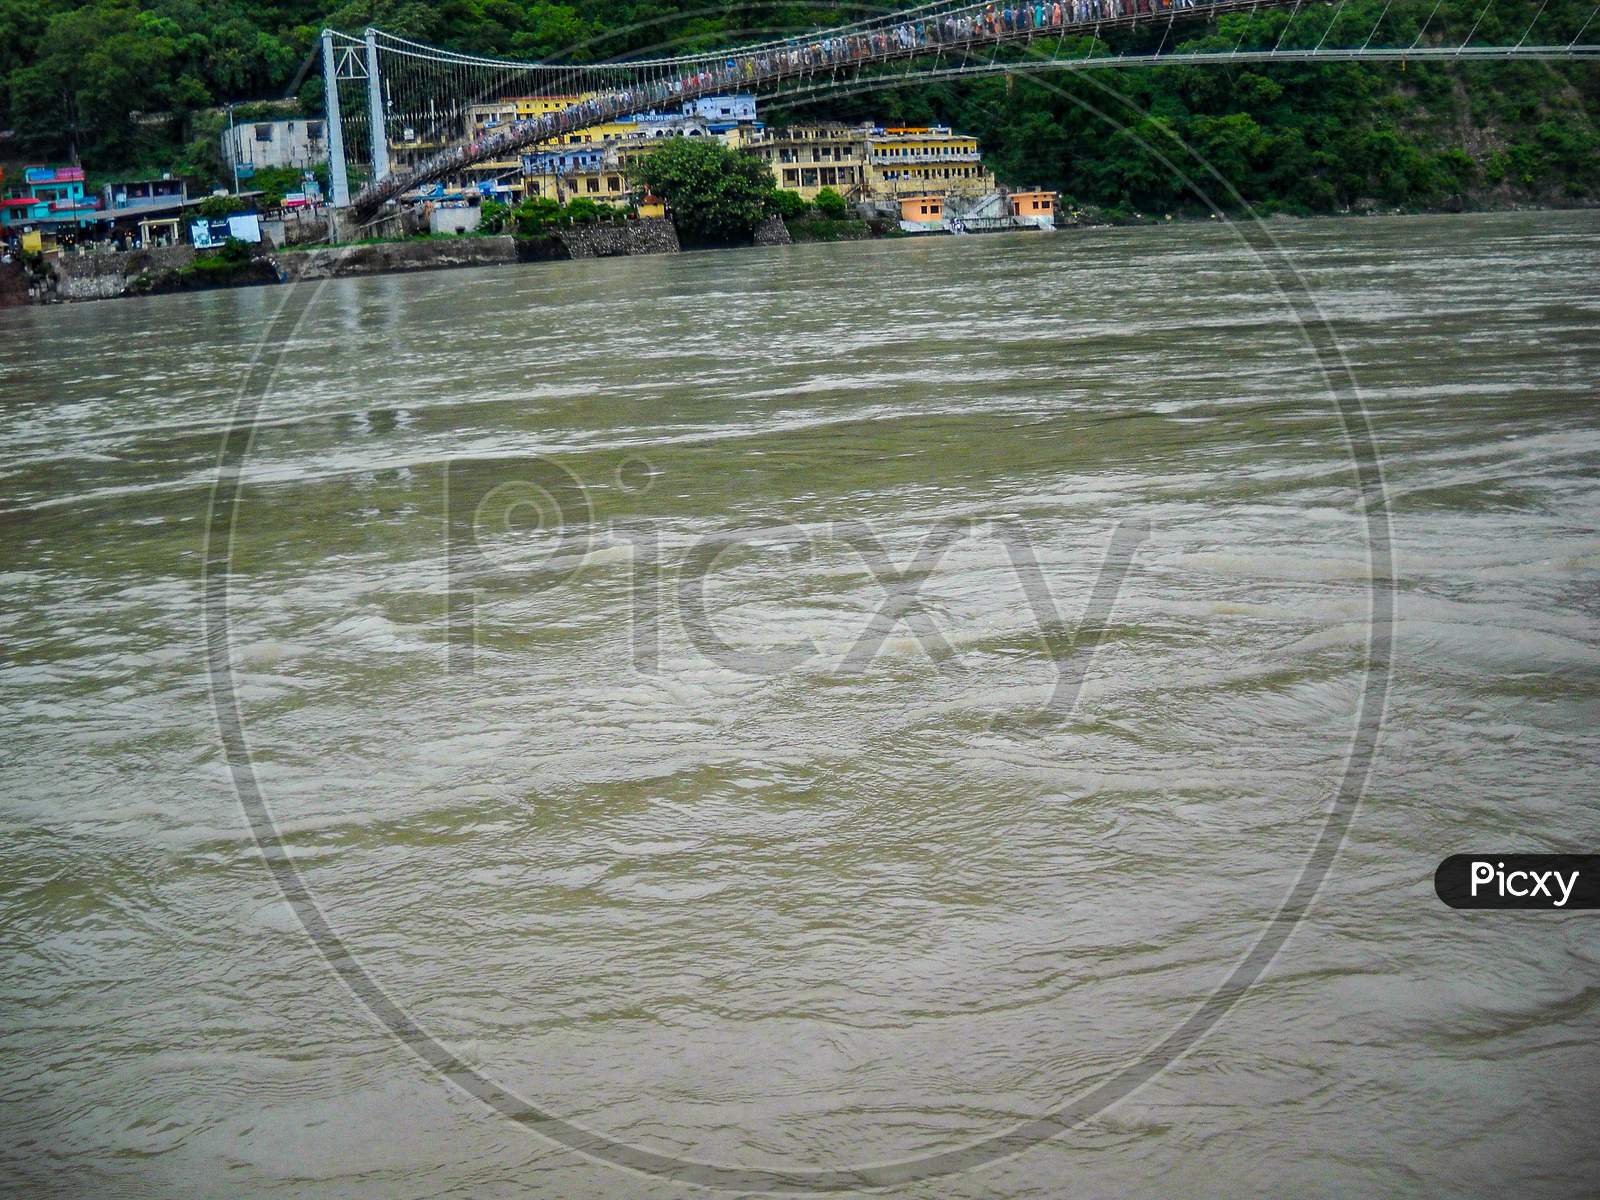 Ganga As Seen In Rishikesh, Uttarakhand. River Ganga Is Believed To Be The Holiest River For Hindus, Rishikesh Valley On The Ganges River, India